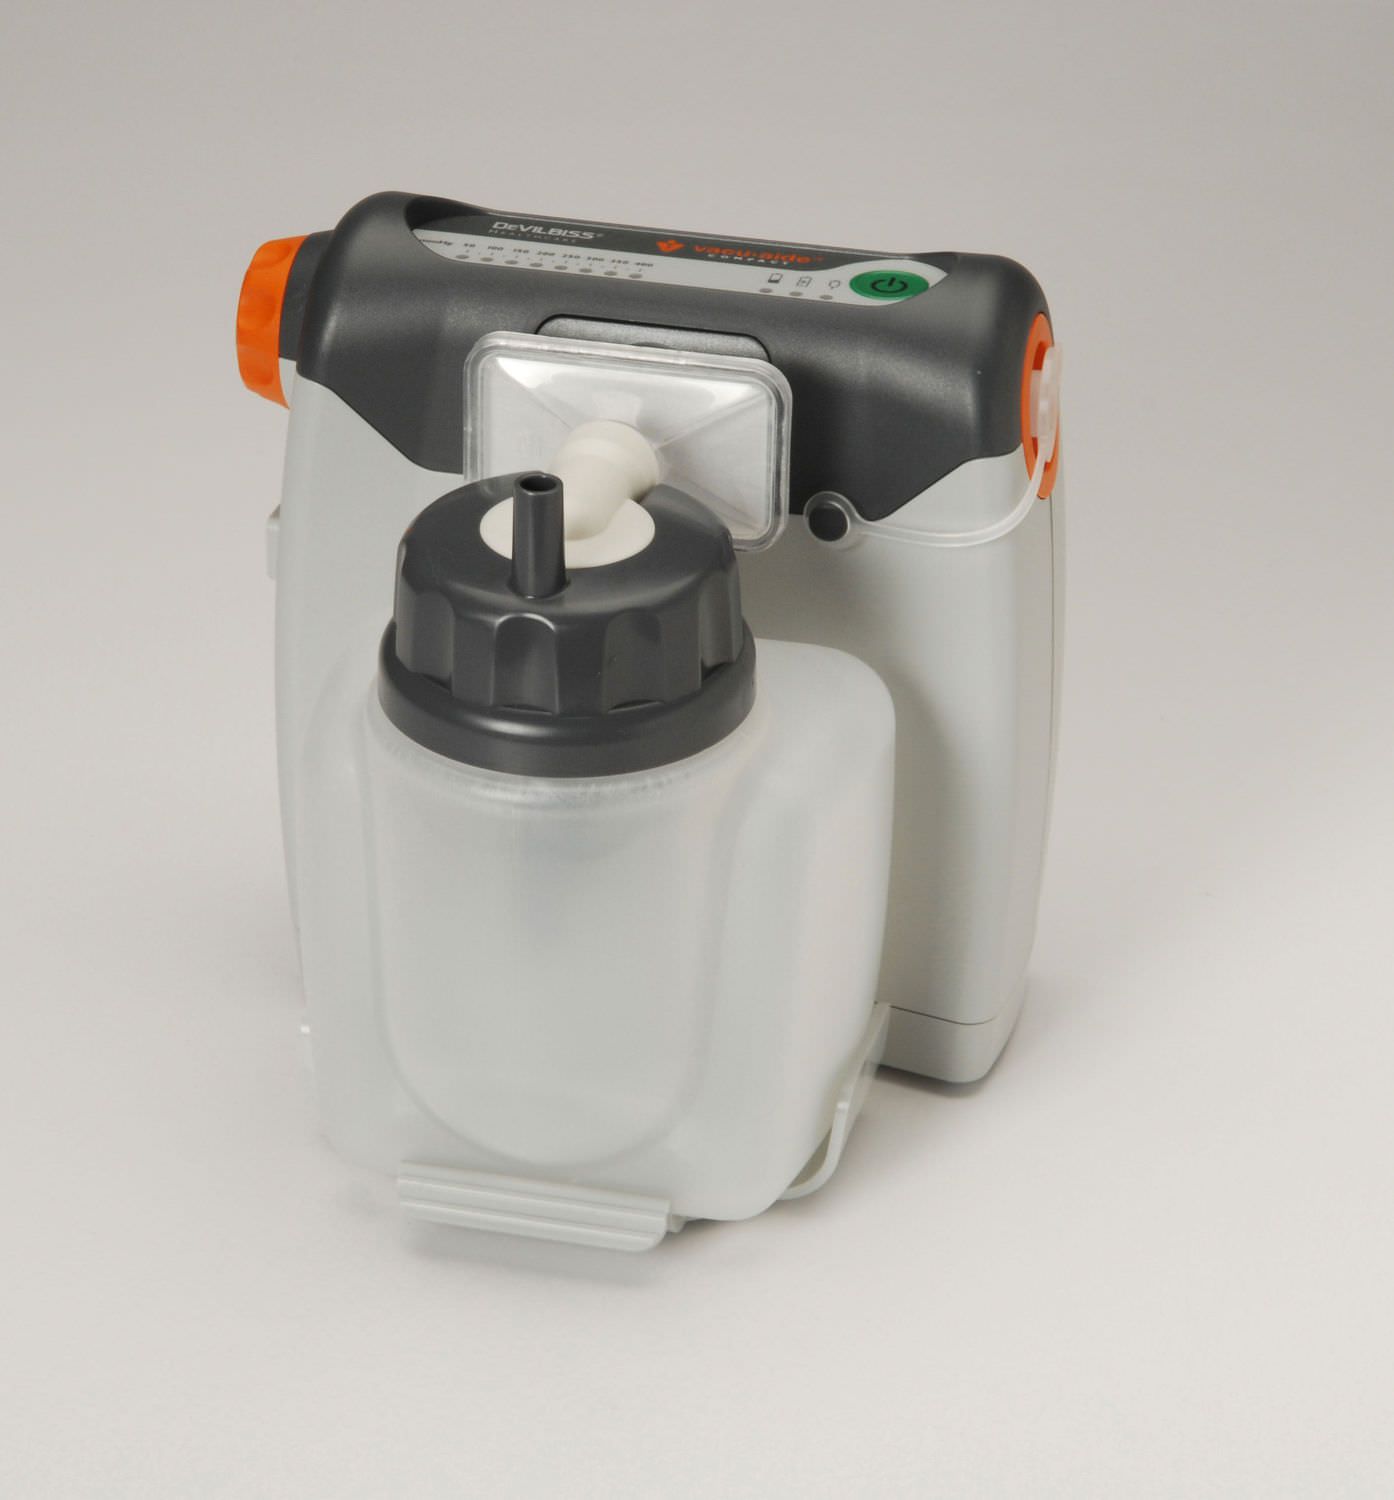 Electric mucus suction pump / handheld / battery-powered 27 L/mn | Vacu-Aide® DeVilbiss Healthcare